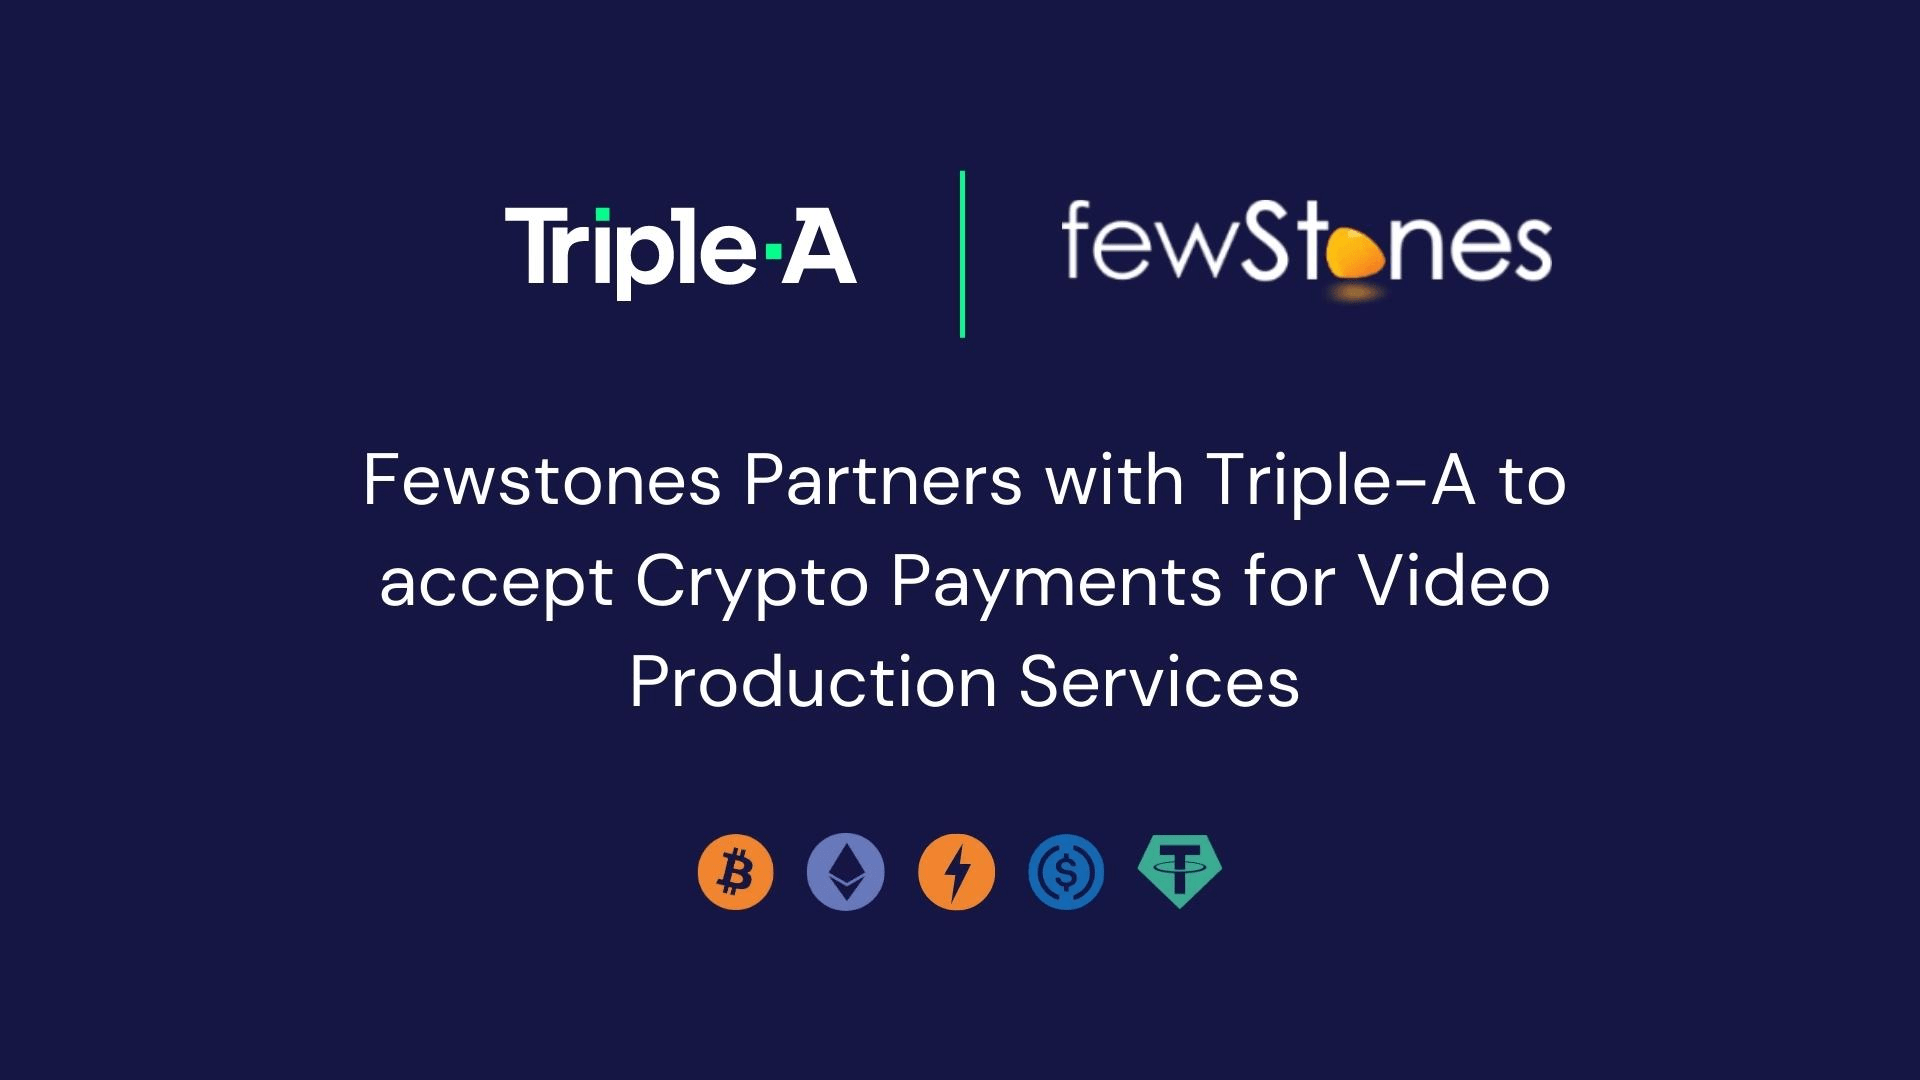 fewStones and TripleA partnership image with their respective logos